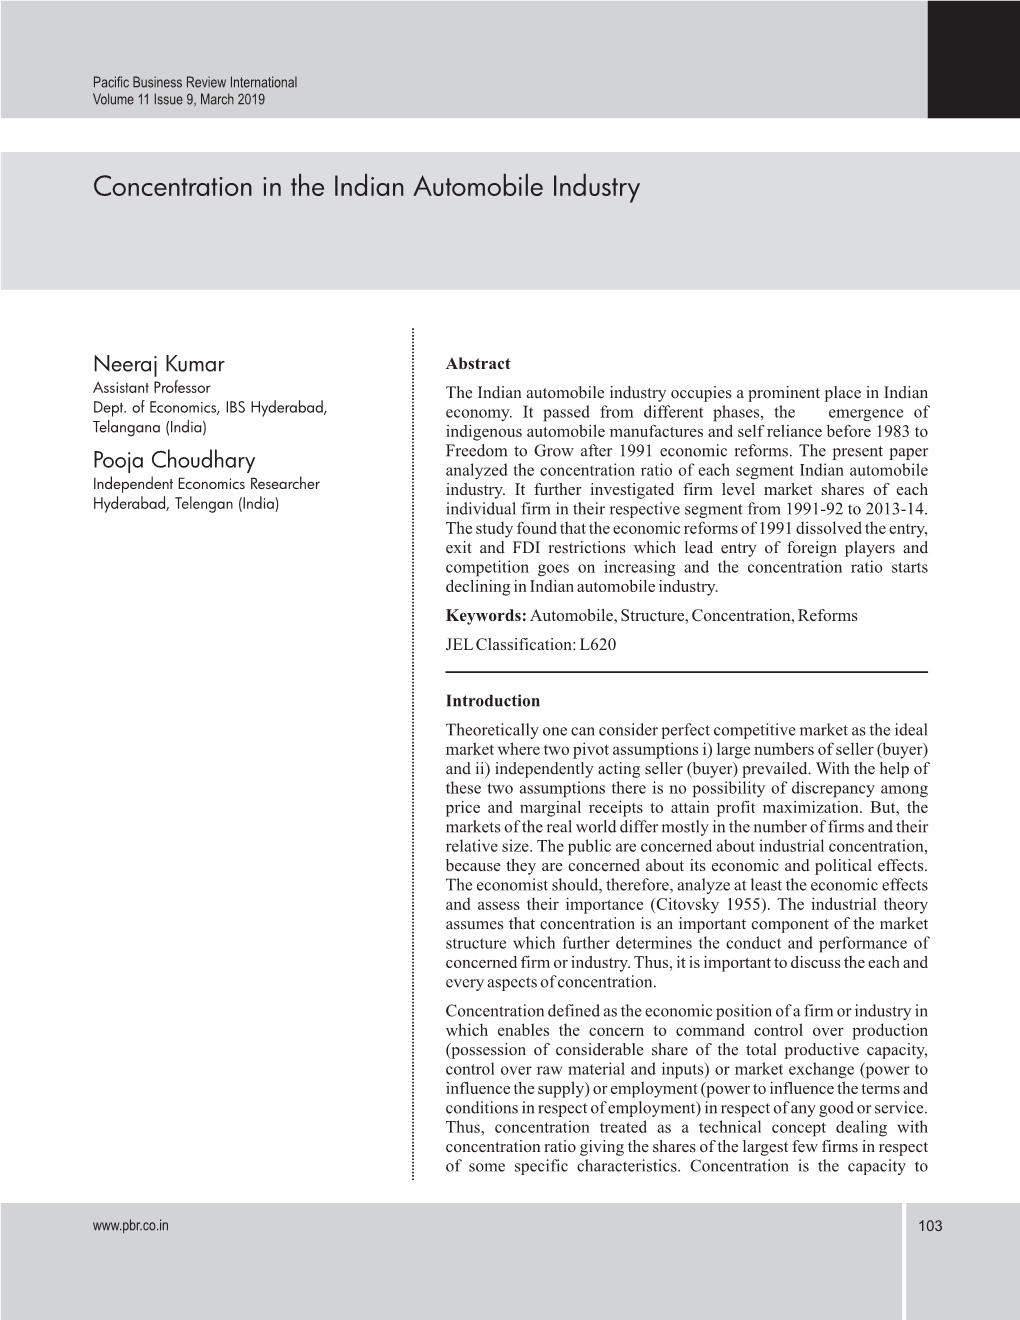 Concentration in the Indian Automobile Industry